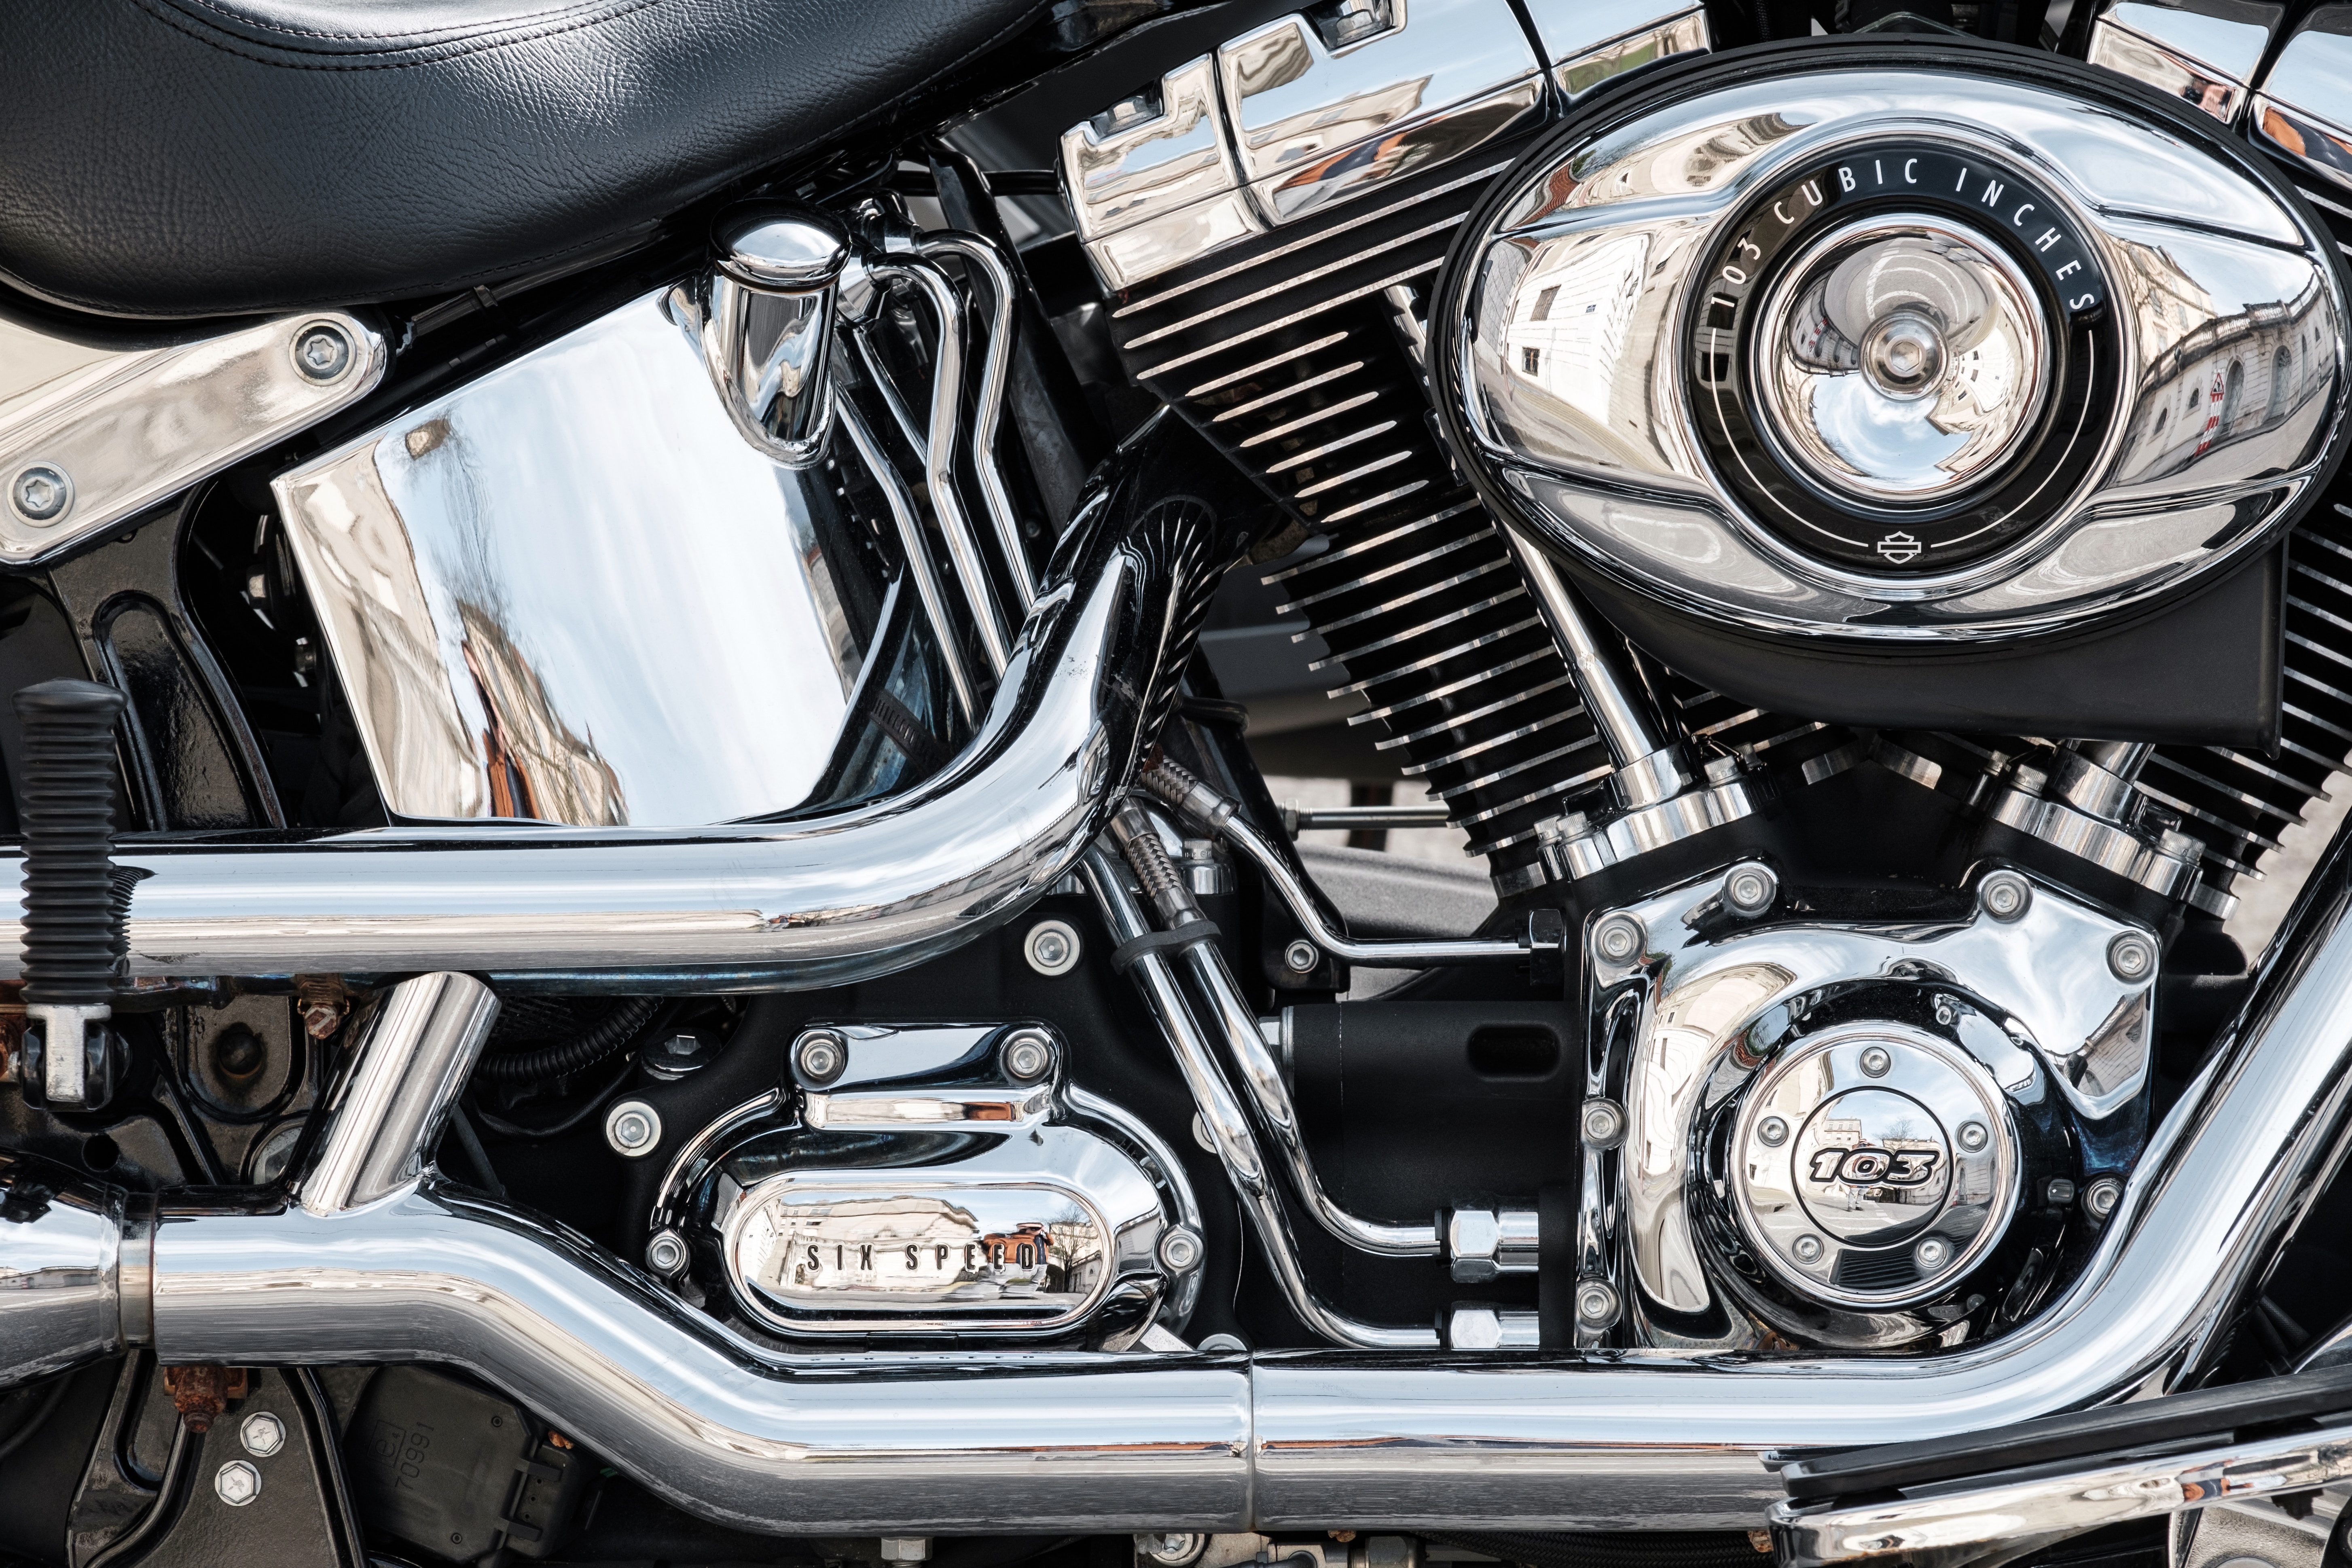 Best Oil For Motorcycle Oil Changes Harley Oil Specs